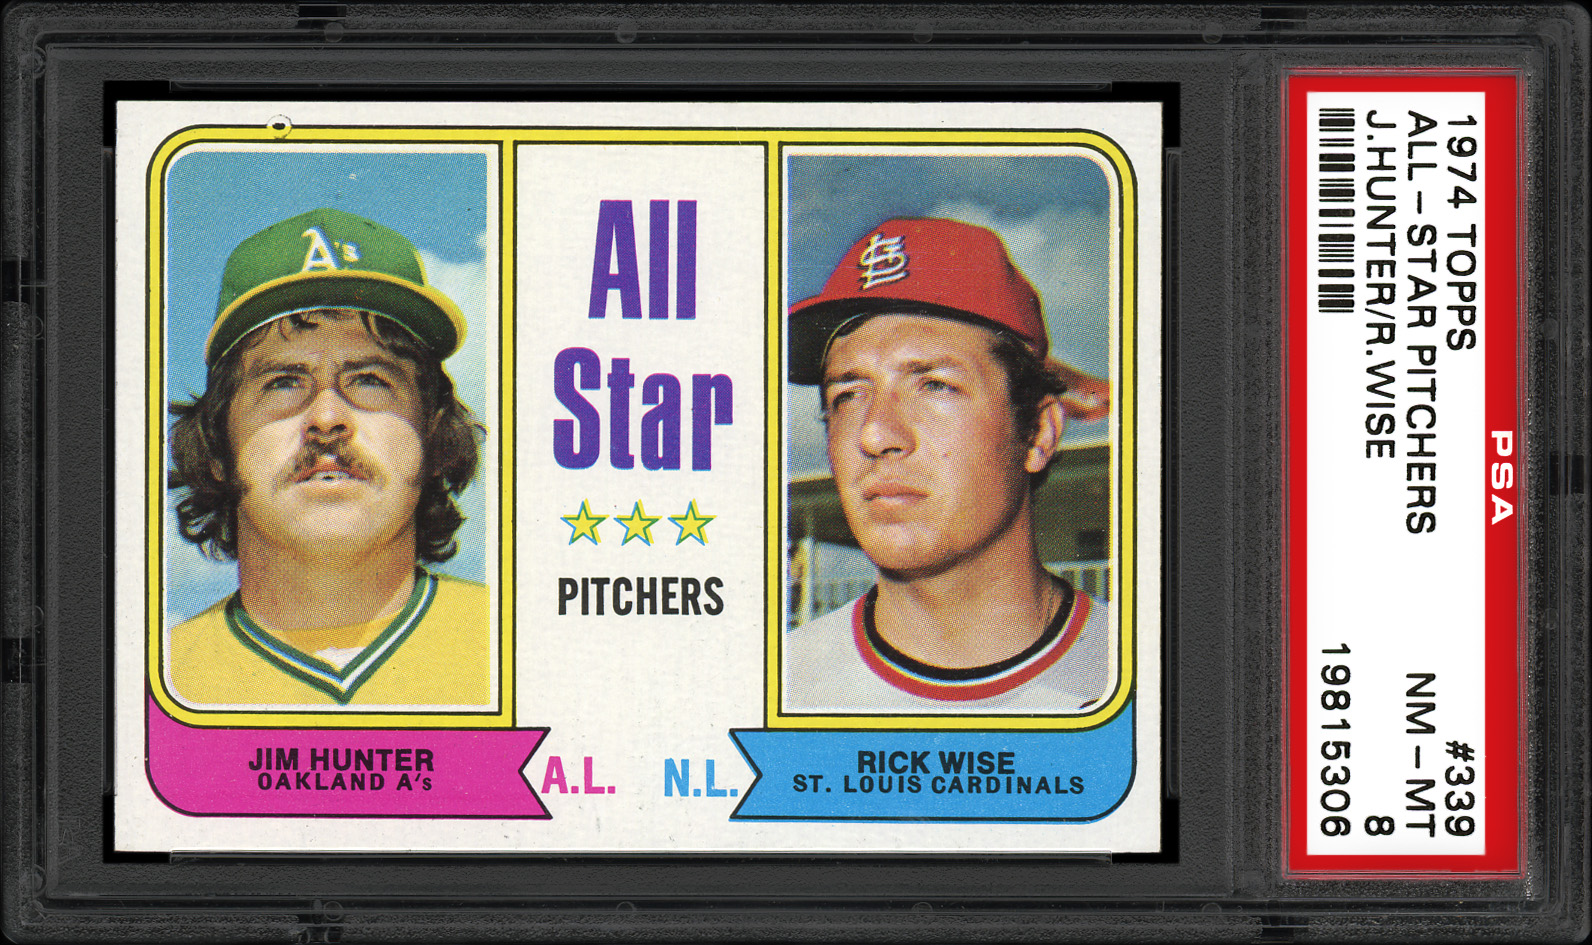 1974 Topps All-Star Pitchers (Jim Hunter/Rick Wise) | PSA CardFacts®